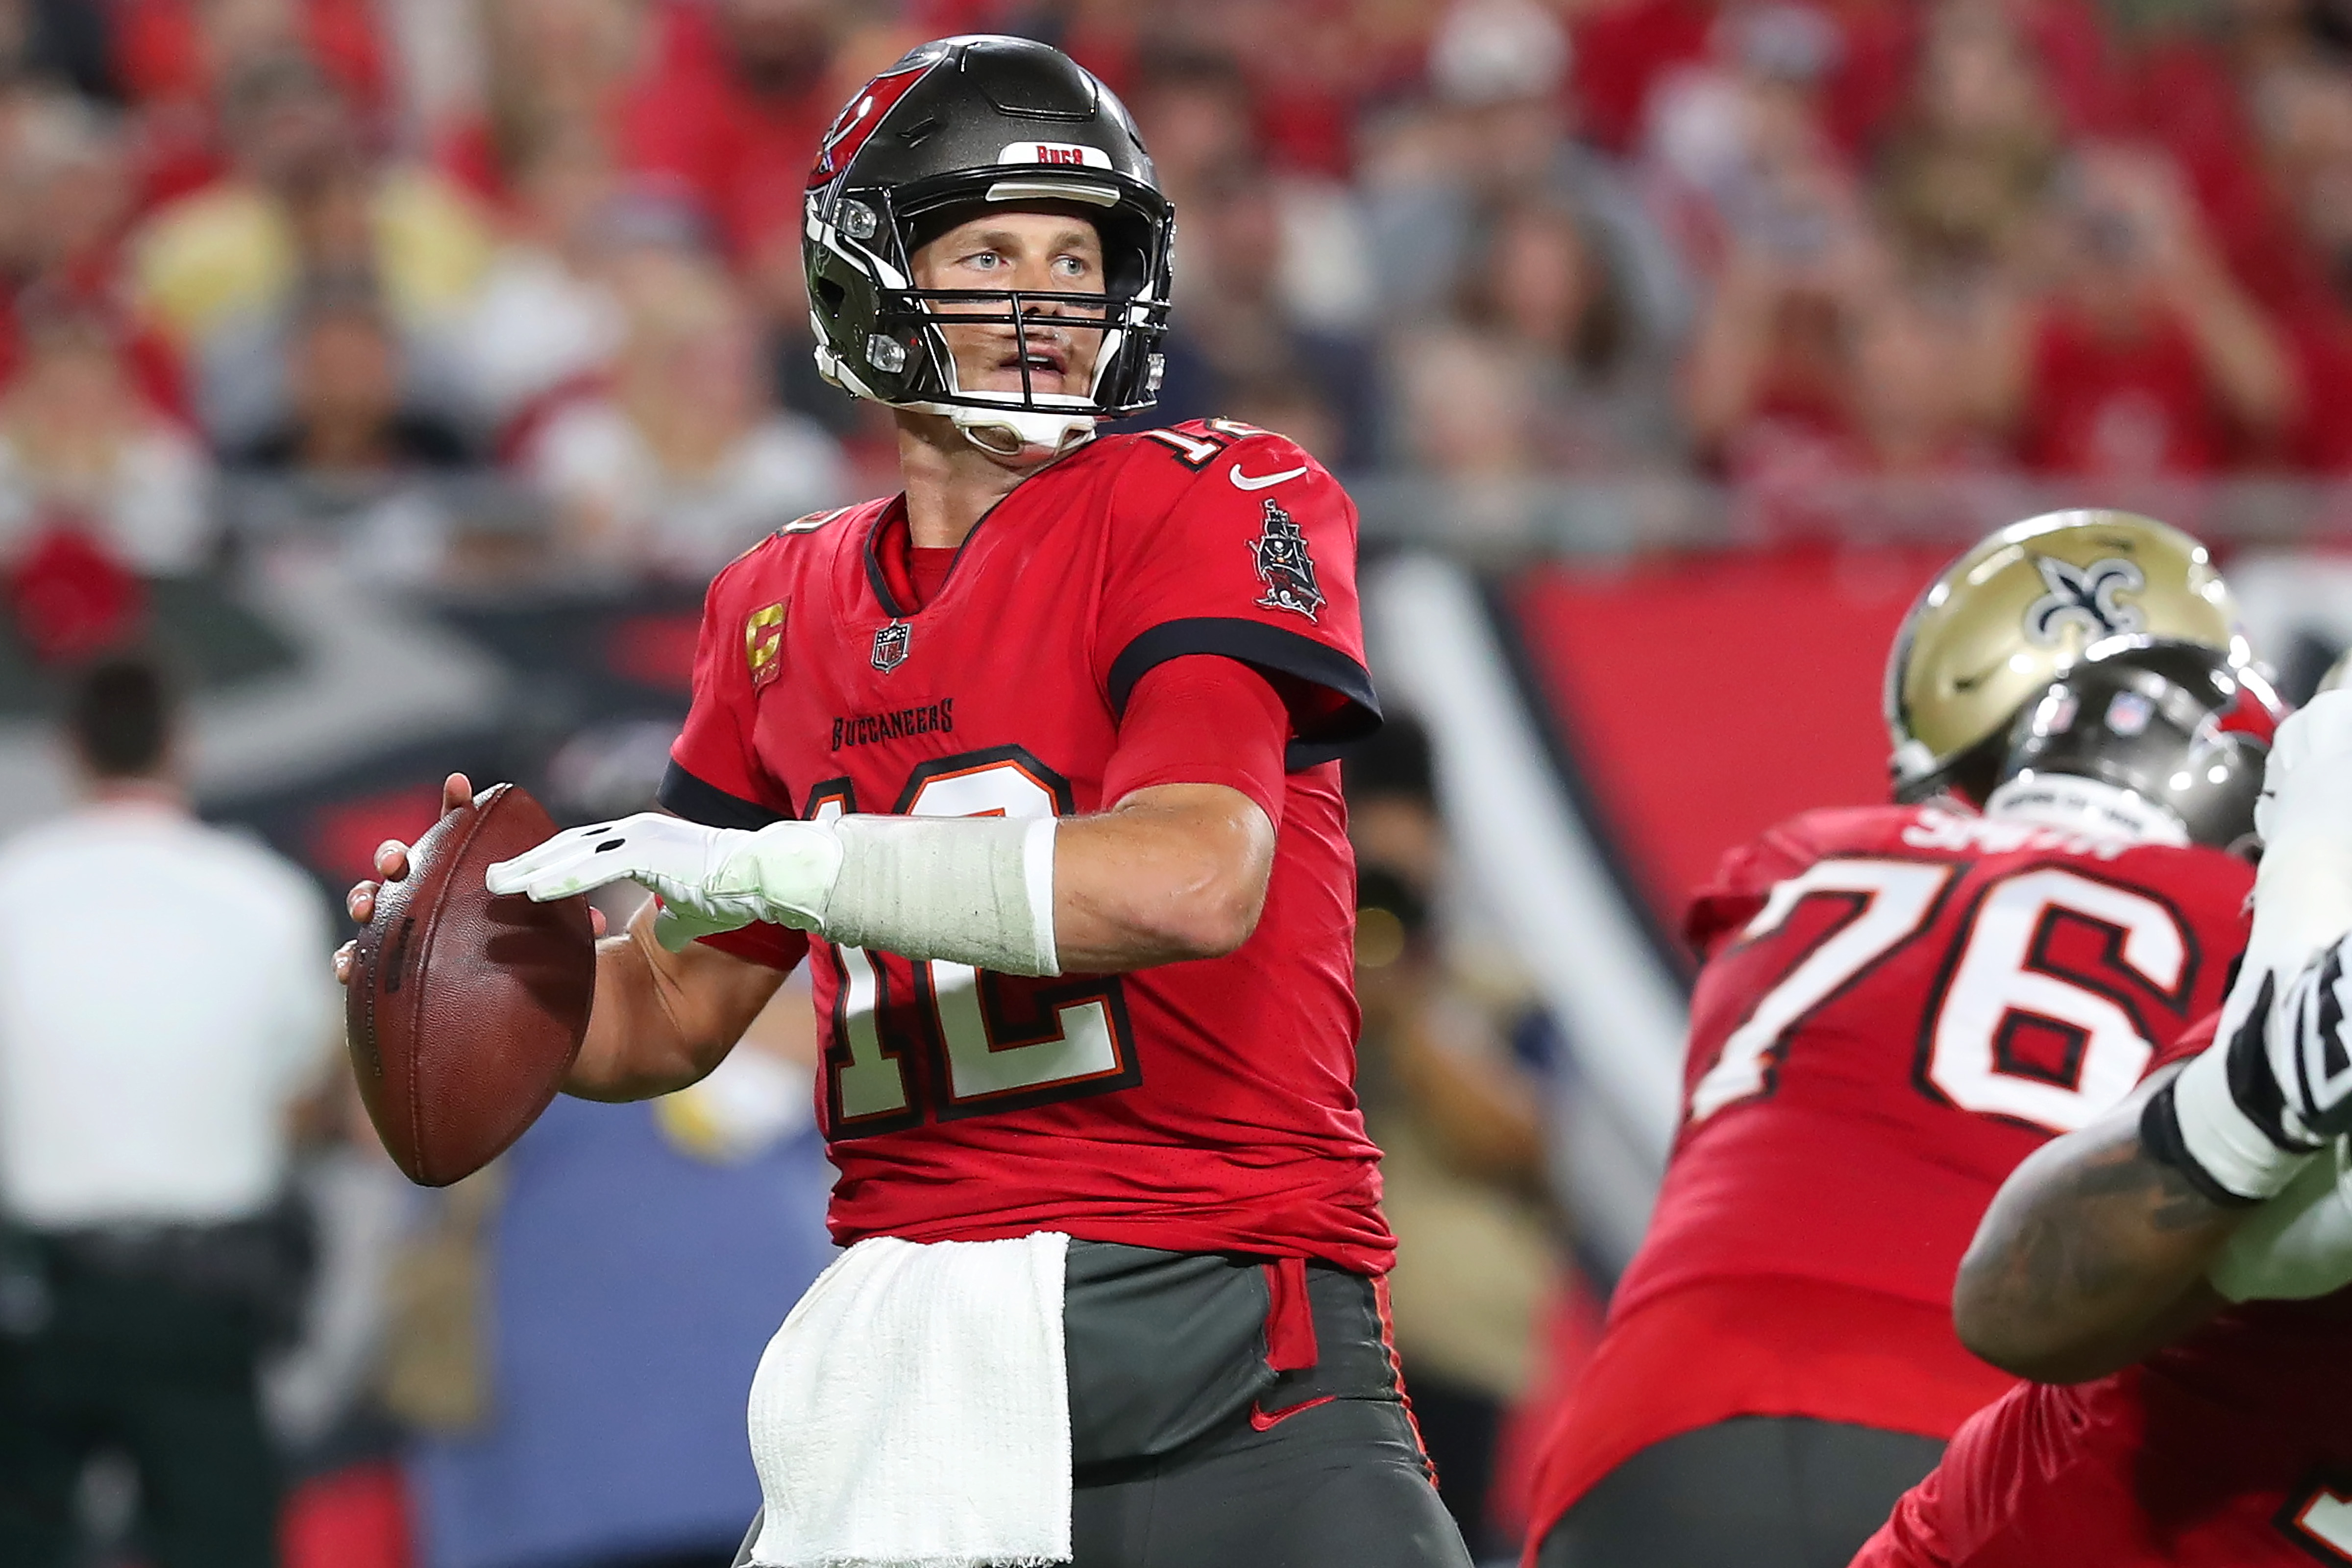 The Tampa Bay Buccaneers can clinch a playoff berth Sunday